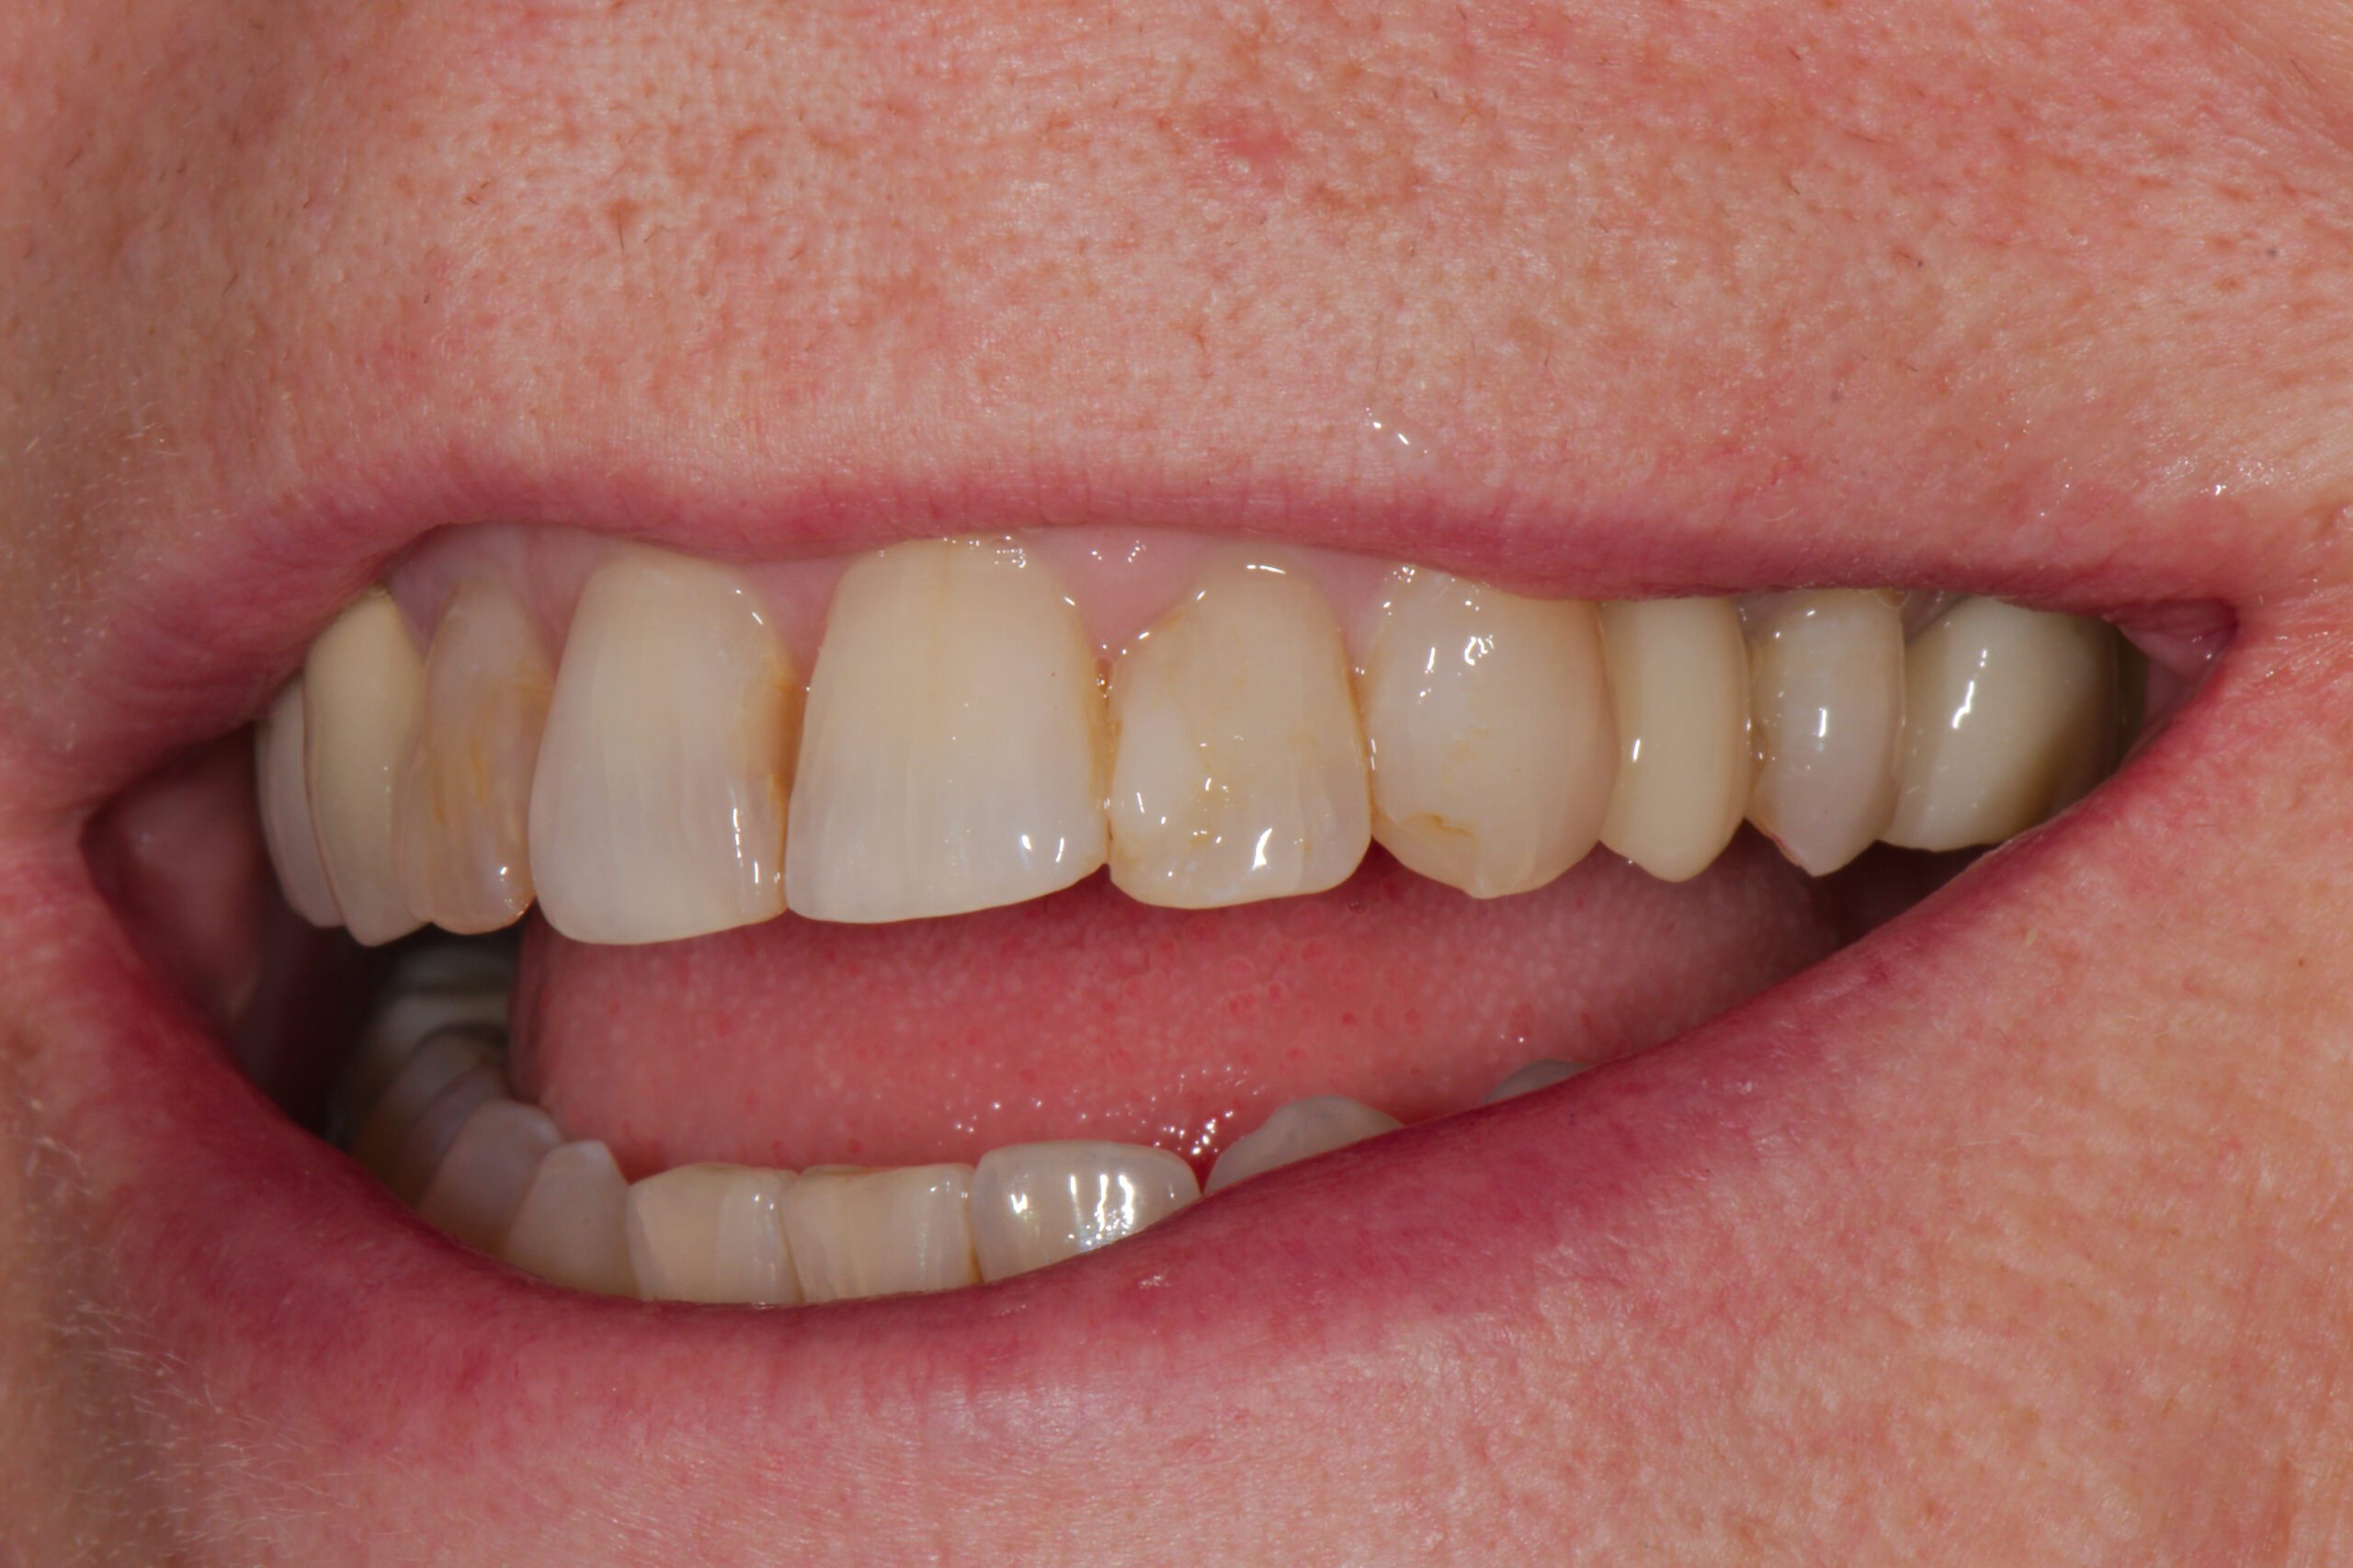 AFTER: Replace/Implant upper left tooth